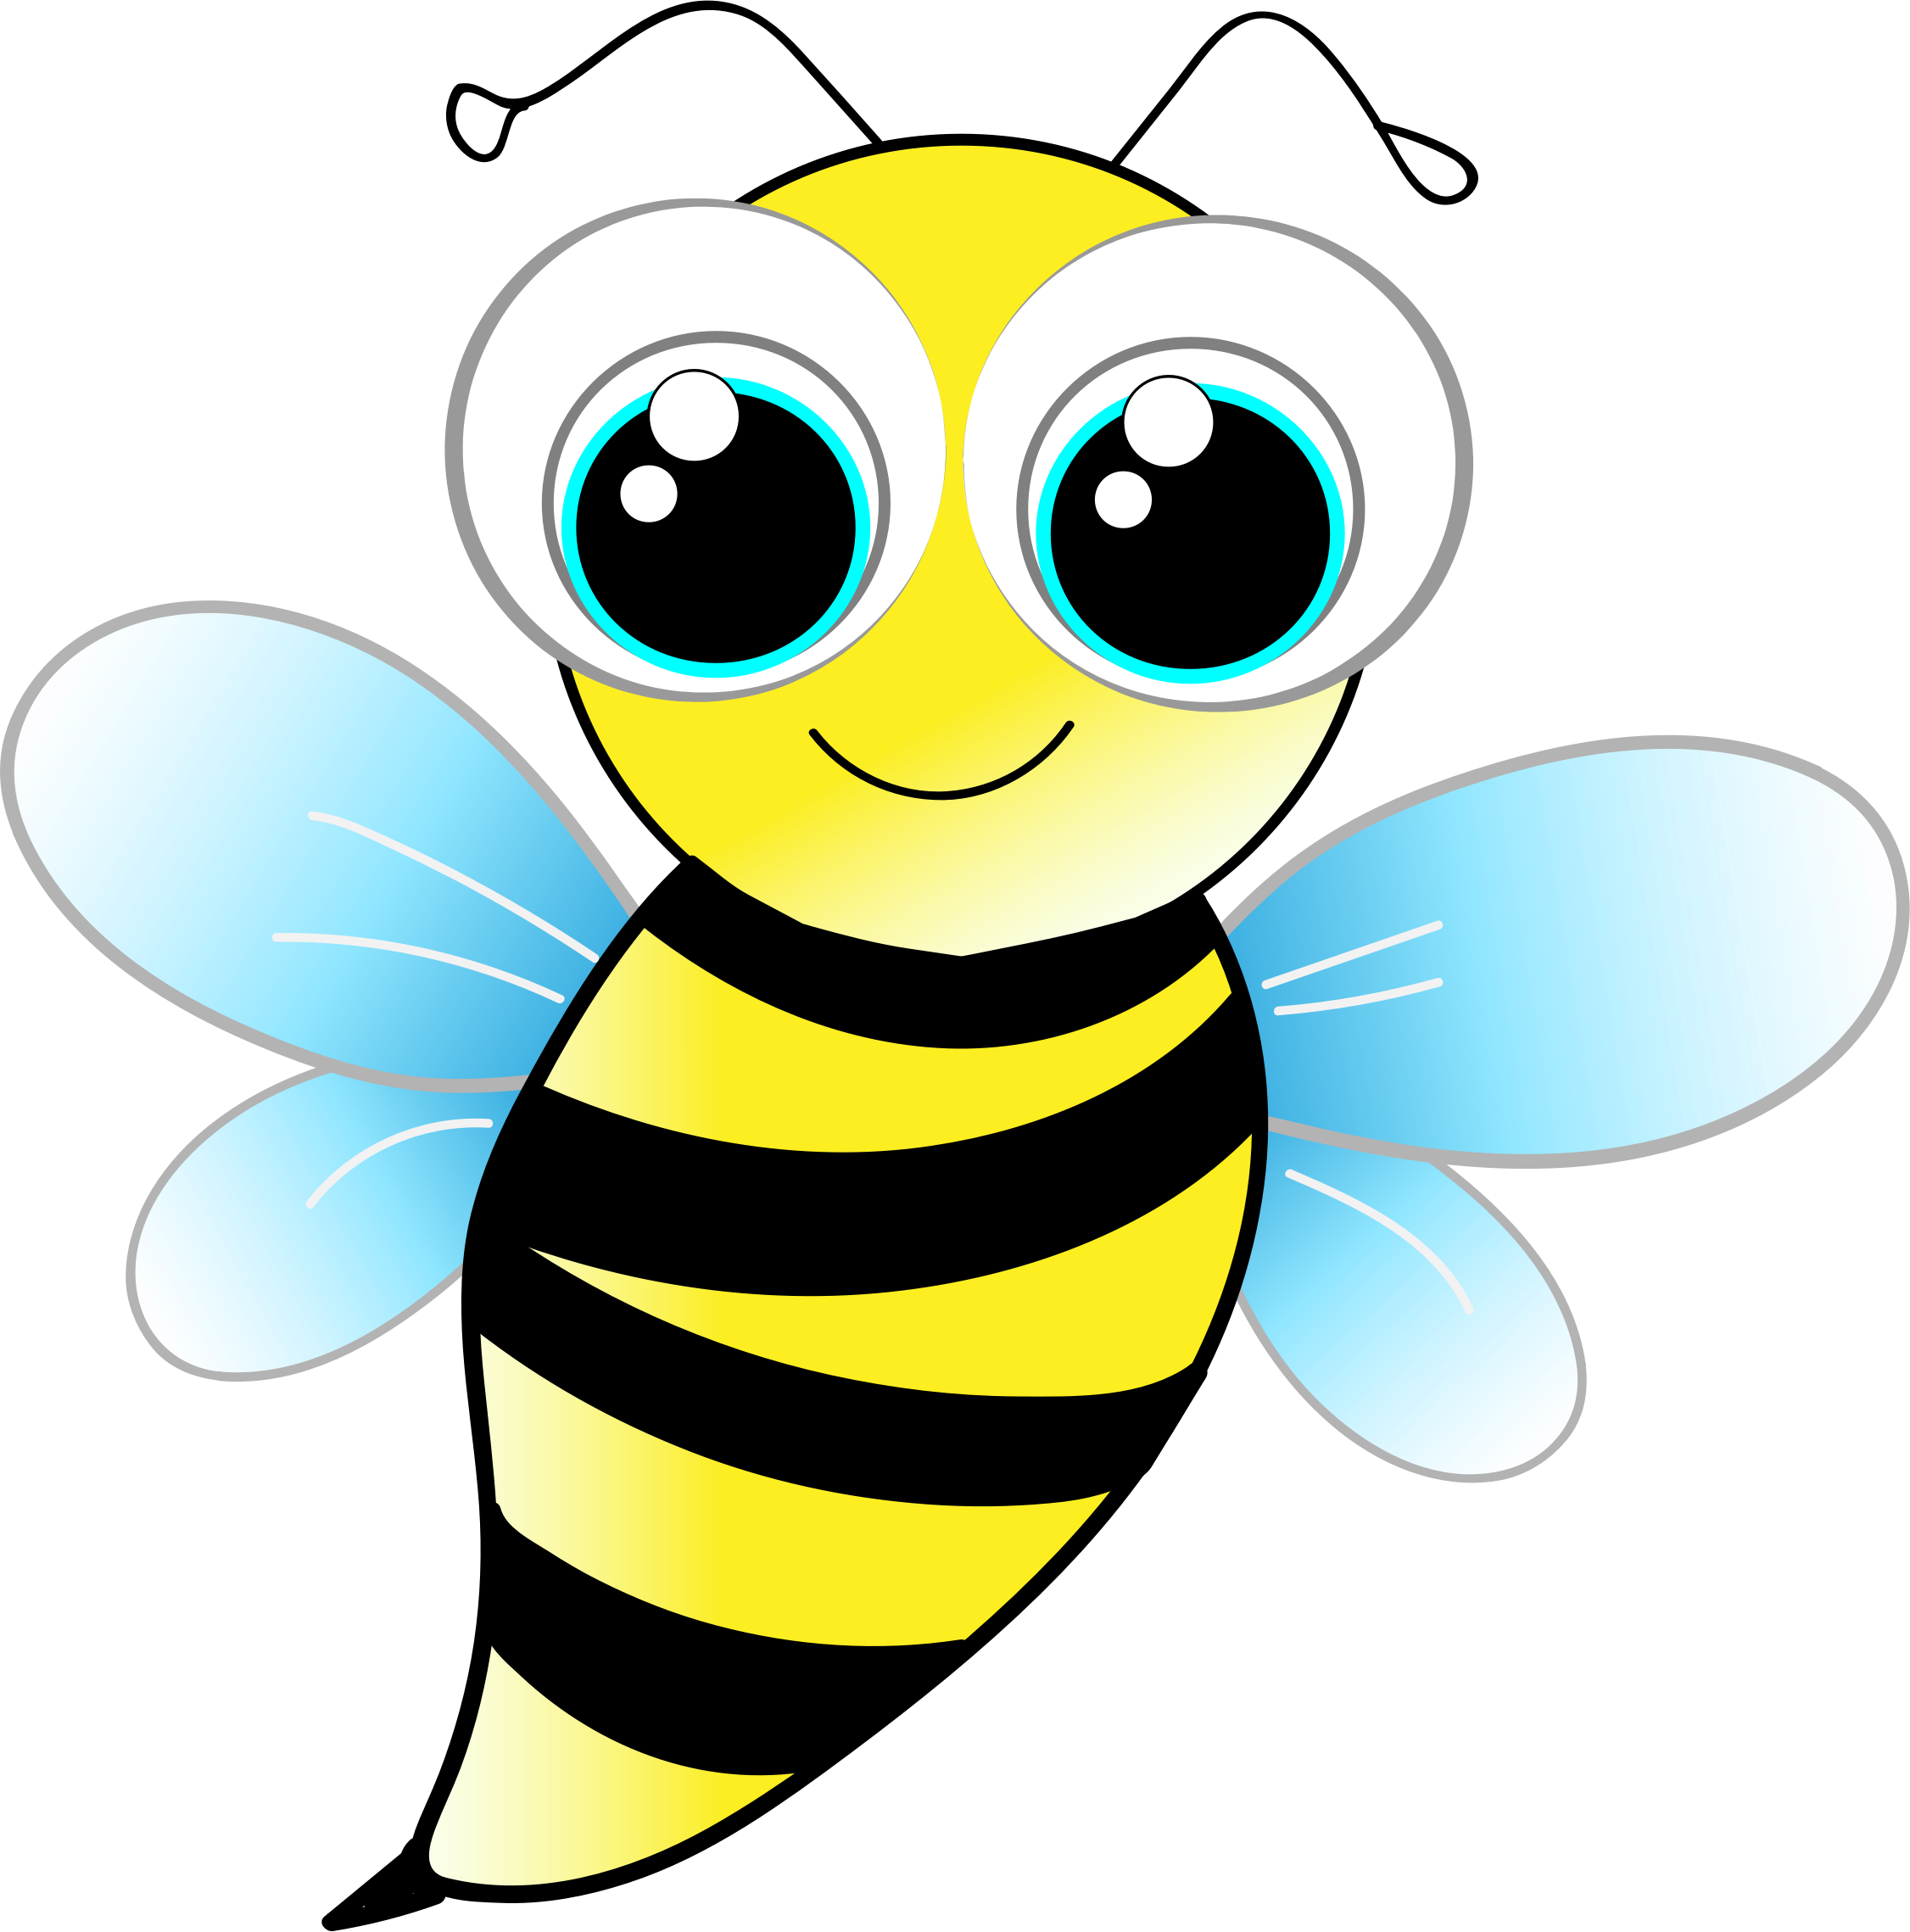 Bee clipart images - ClipartFest